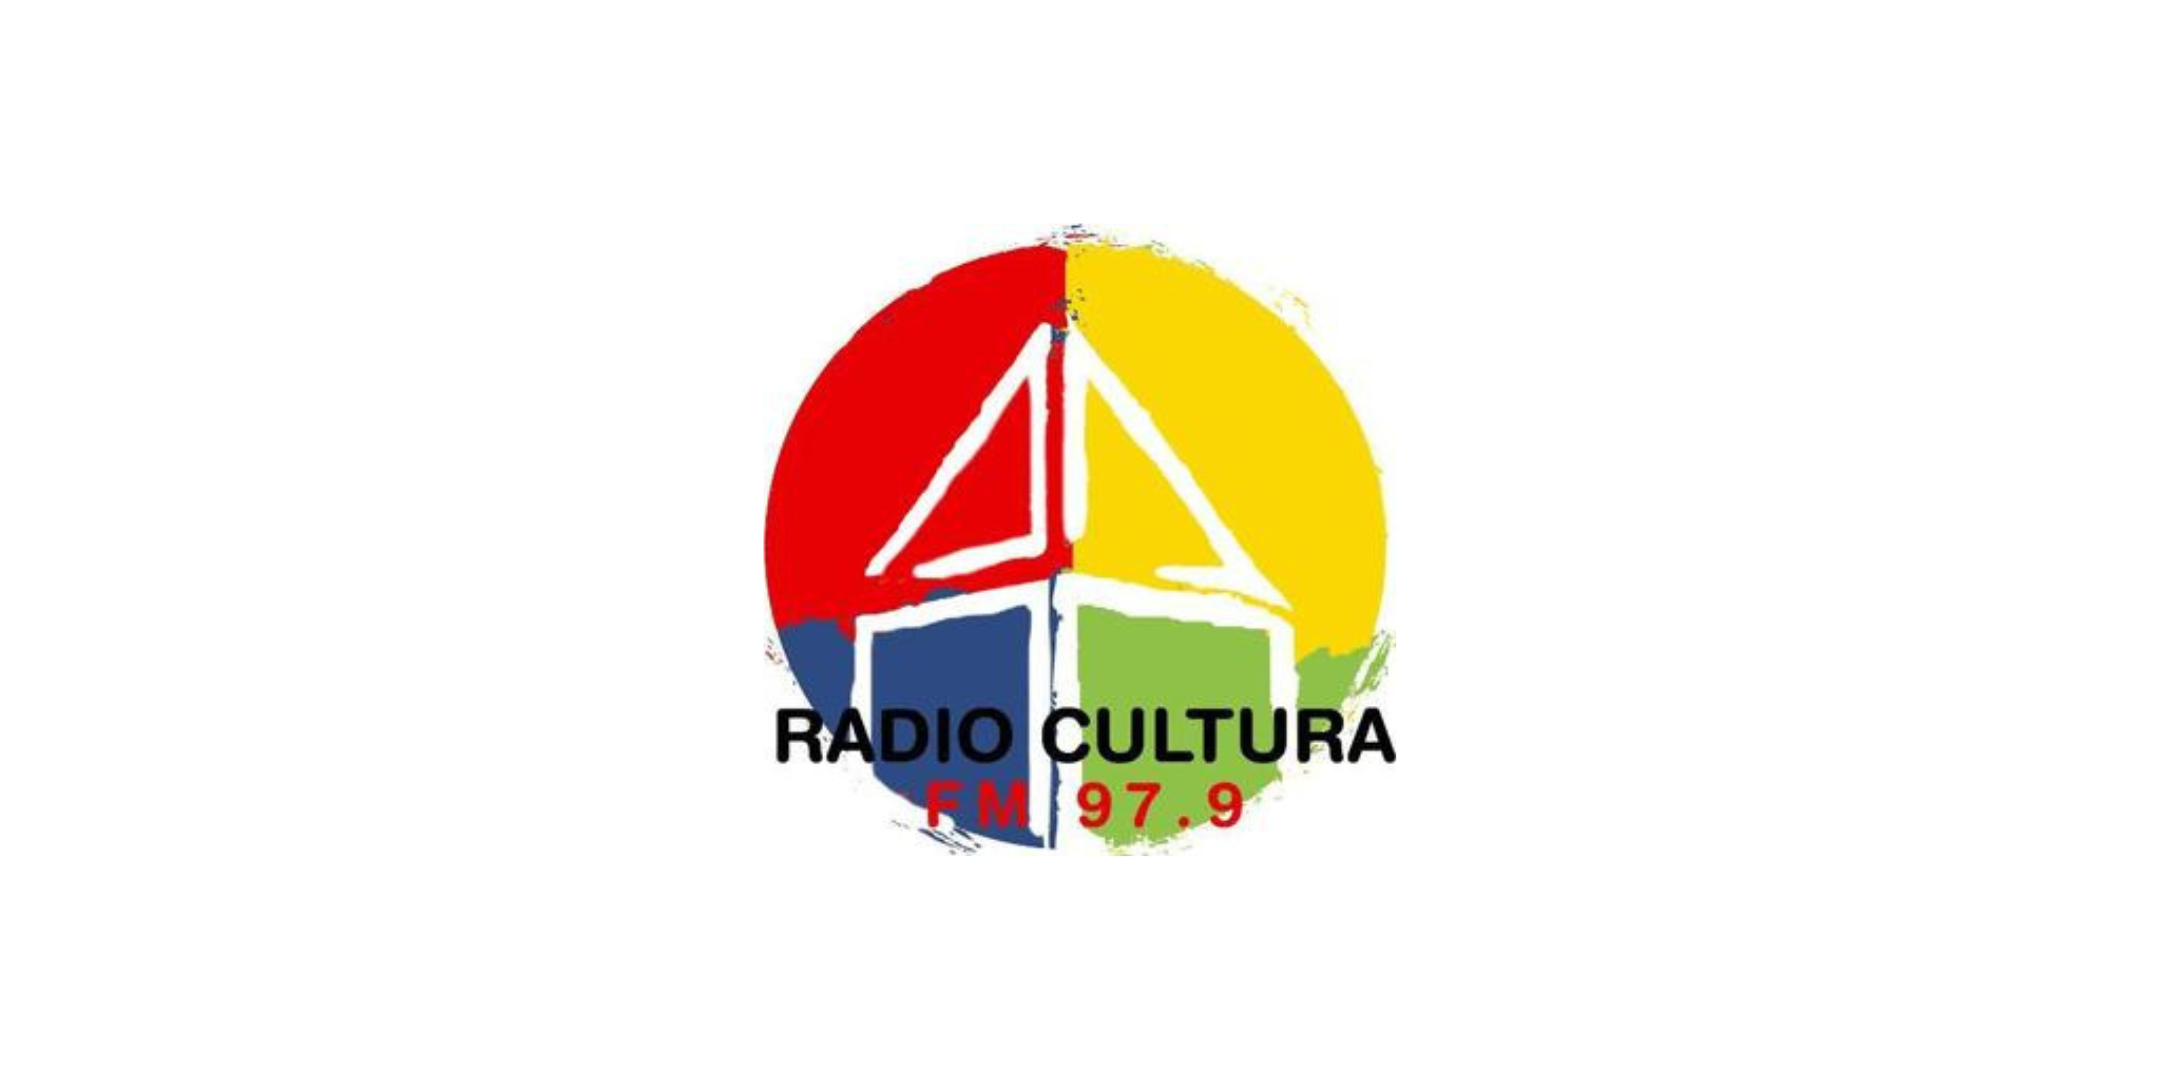 Radio Cultura FM 97.9 | Juan Cacace discusses the role of satellite communications in disaster management